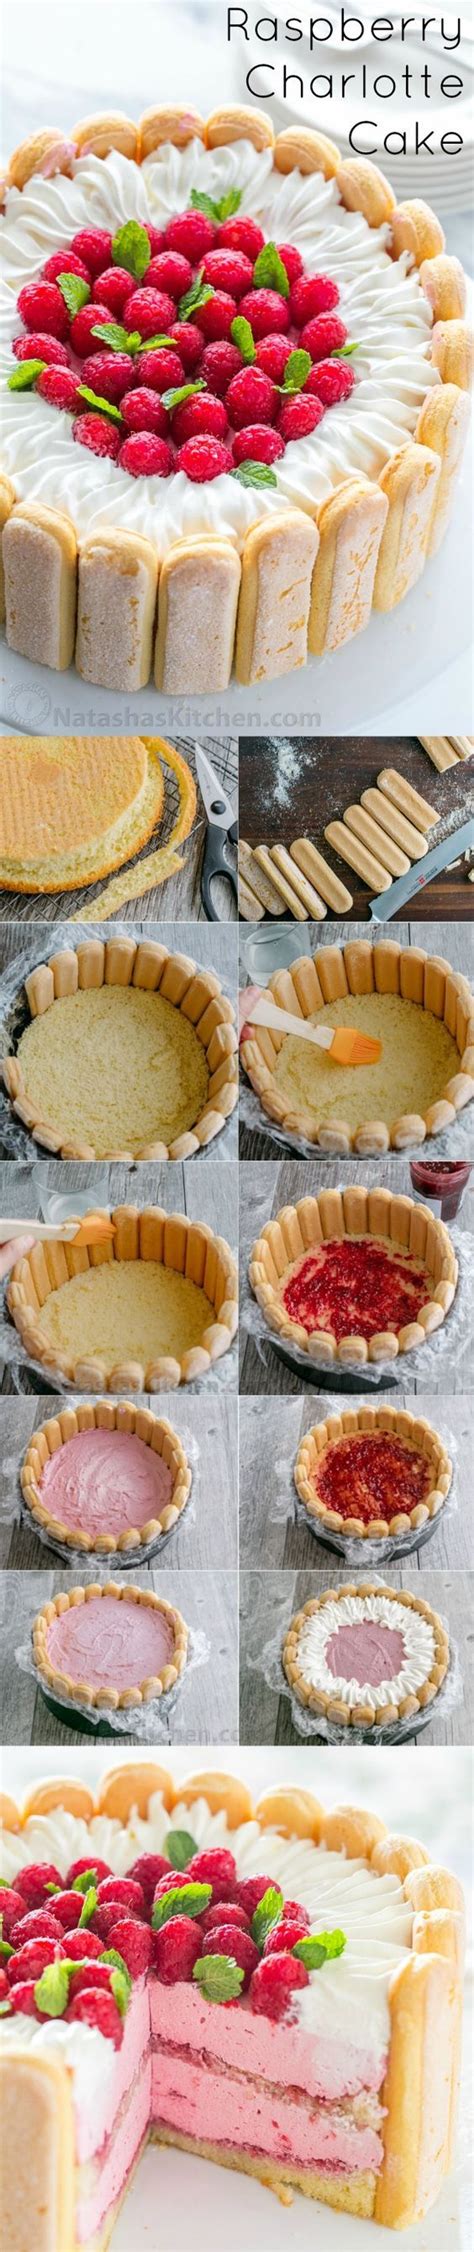 Veras lady finger dessert recipe food 3. Check out Charlotte Cake Recipe with Raspberries. It's so ...